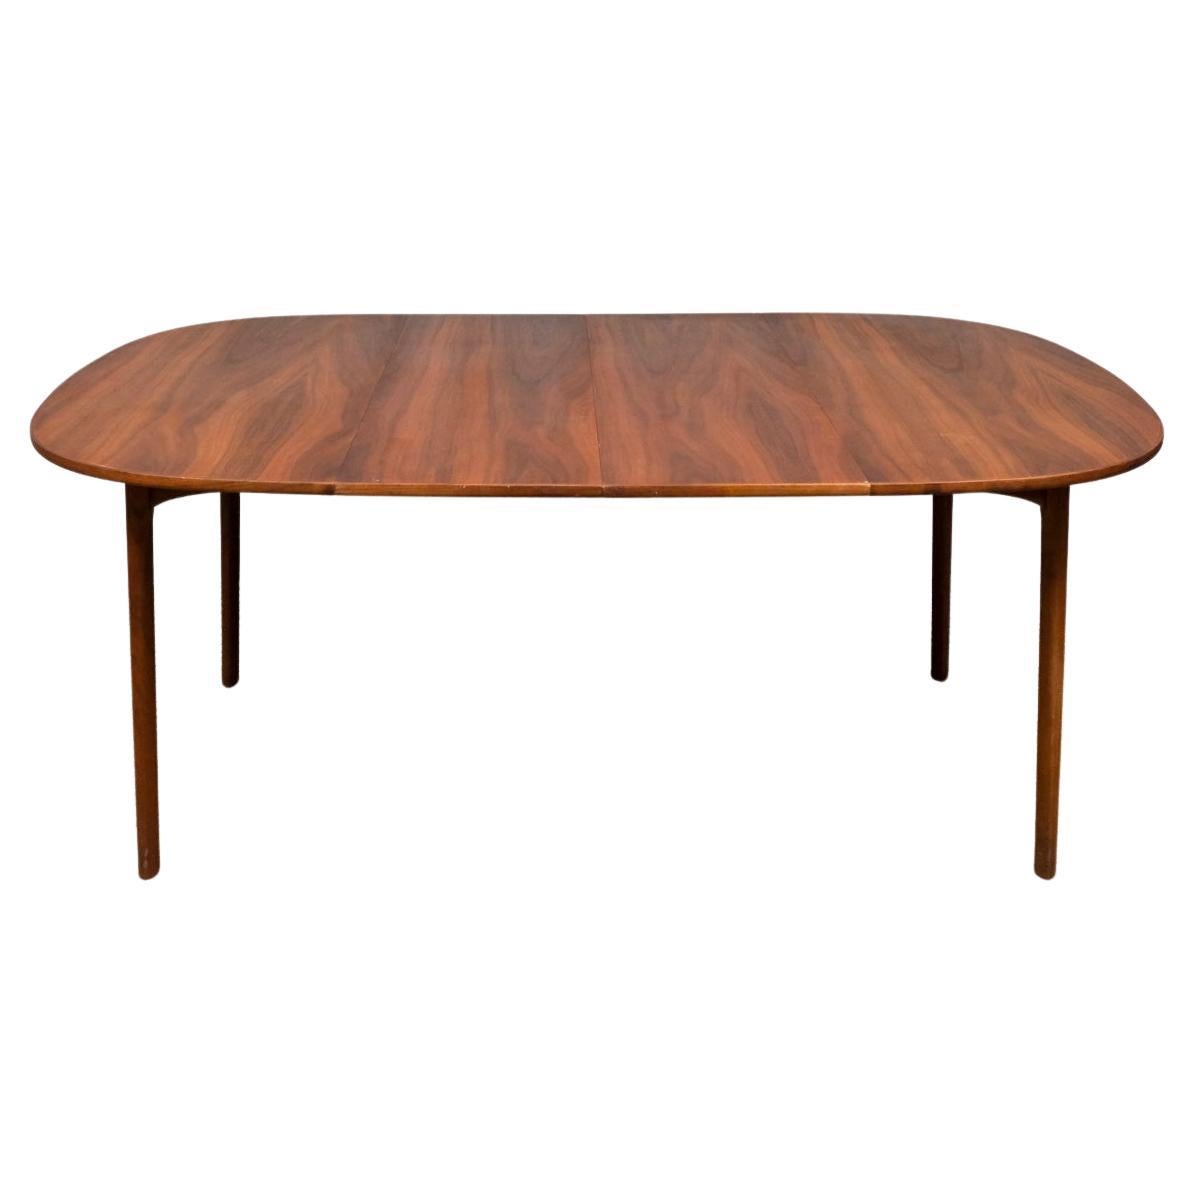 Stunning Mid century modern danish teak rounded dining table with two leaves